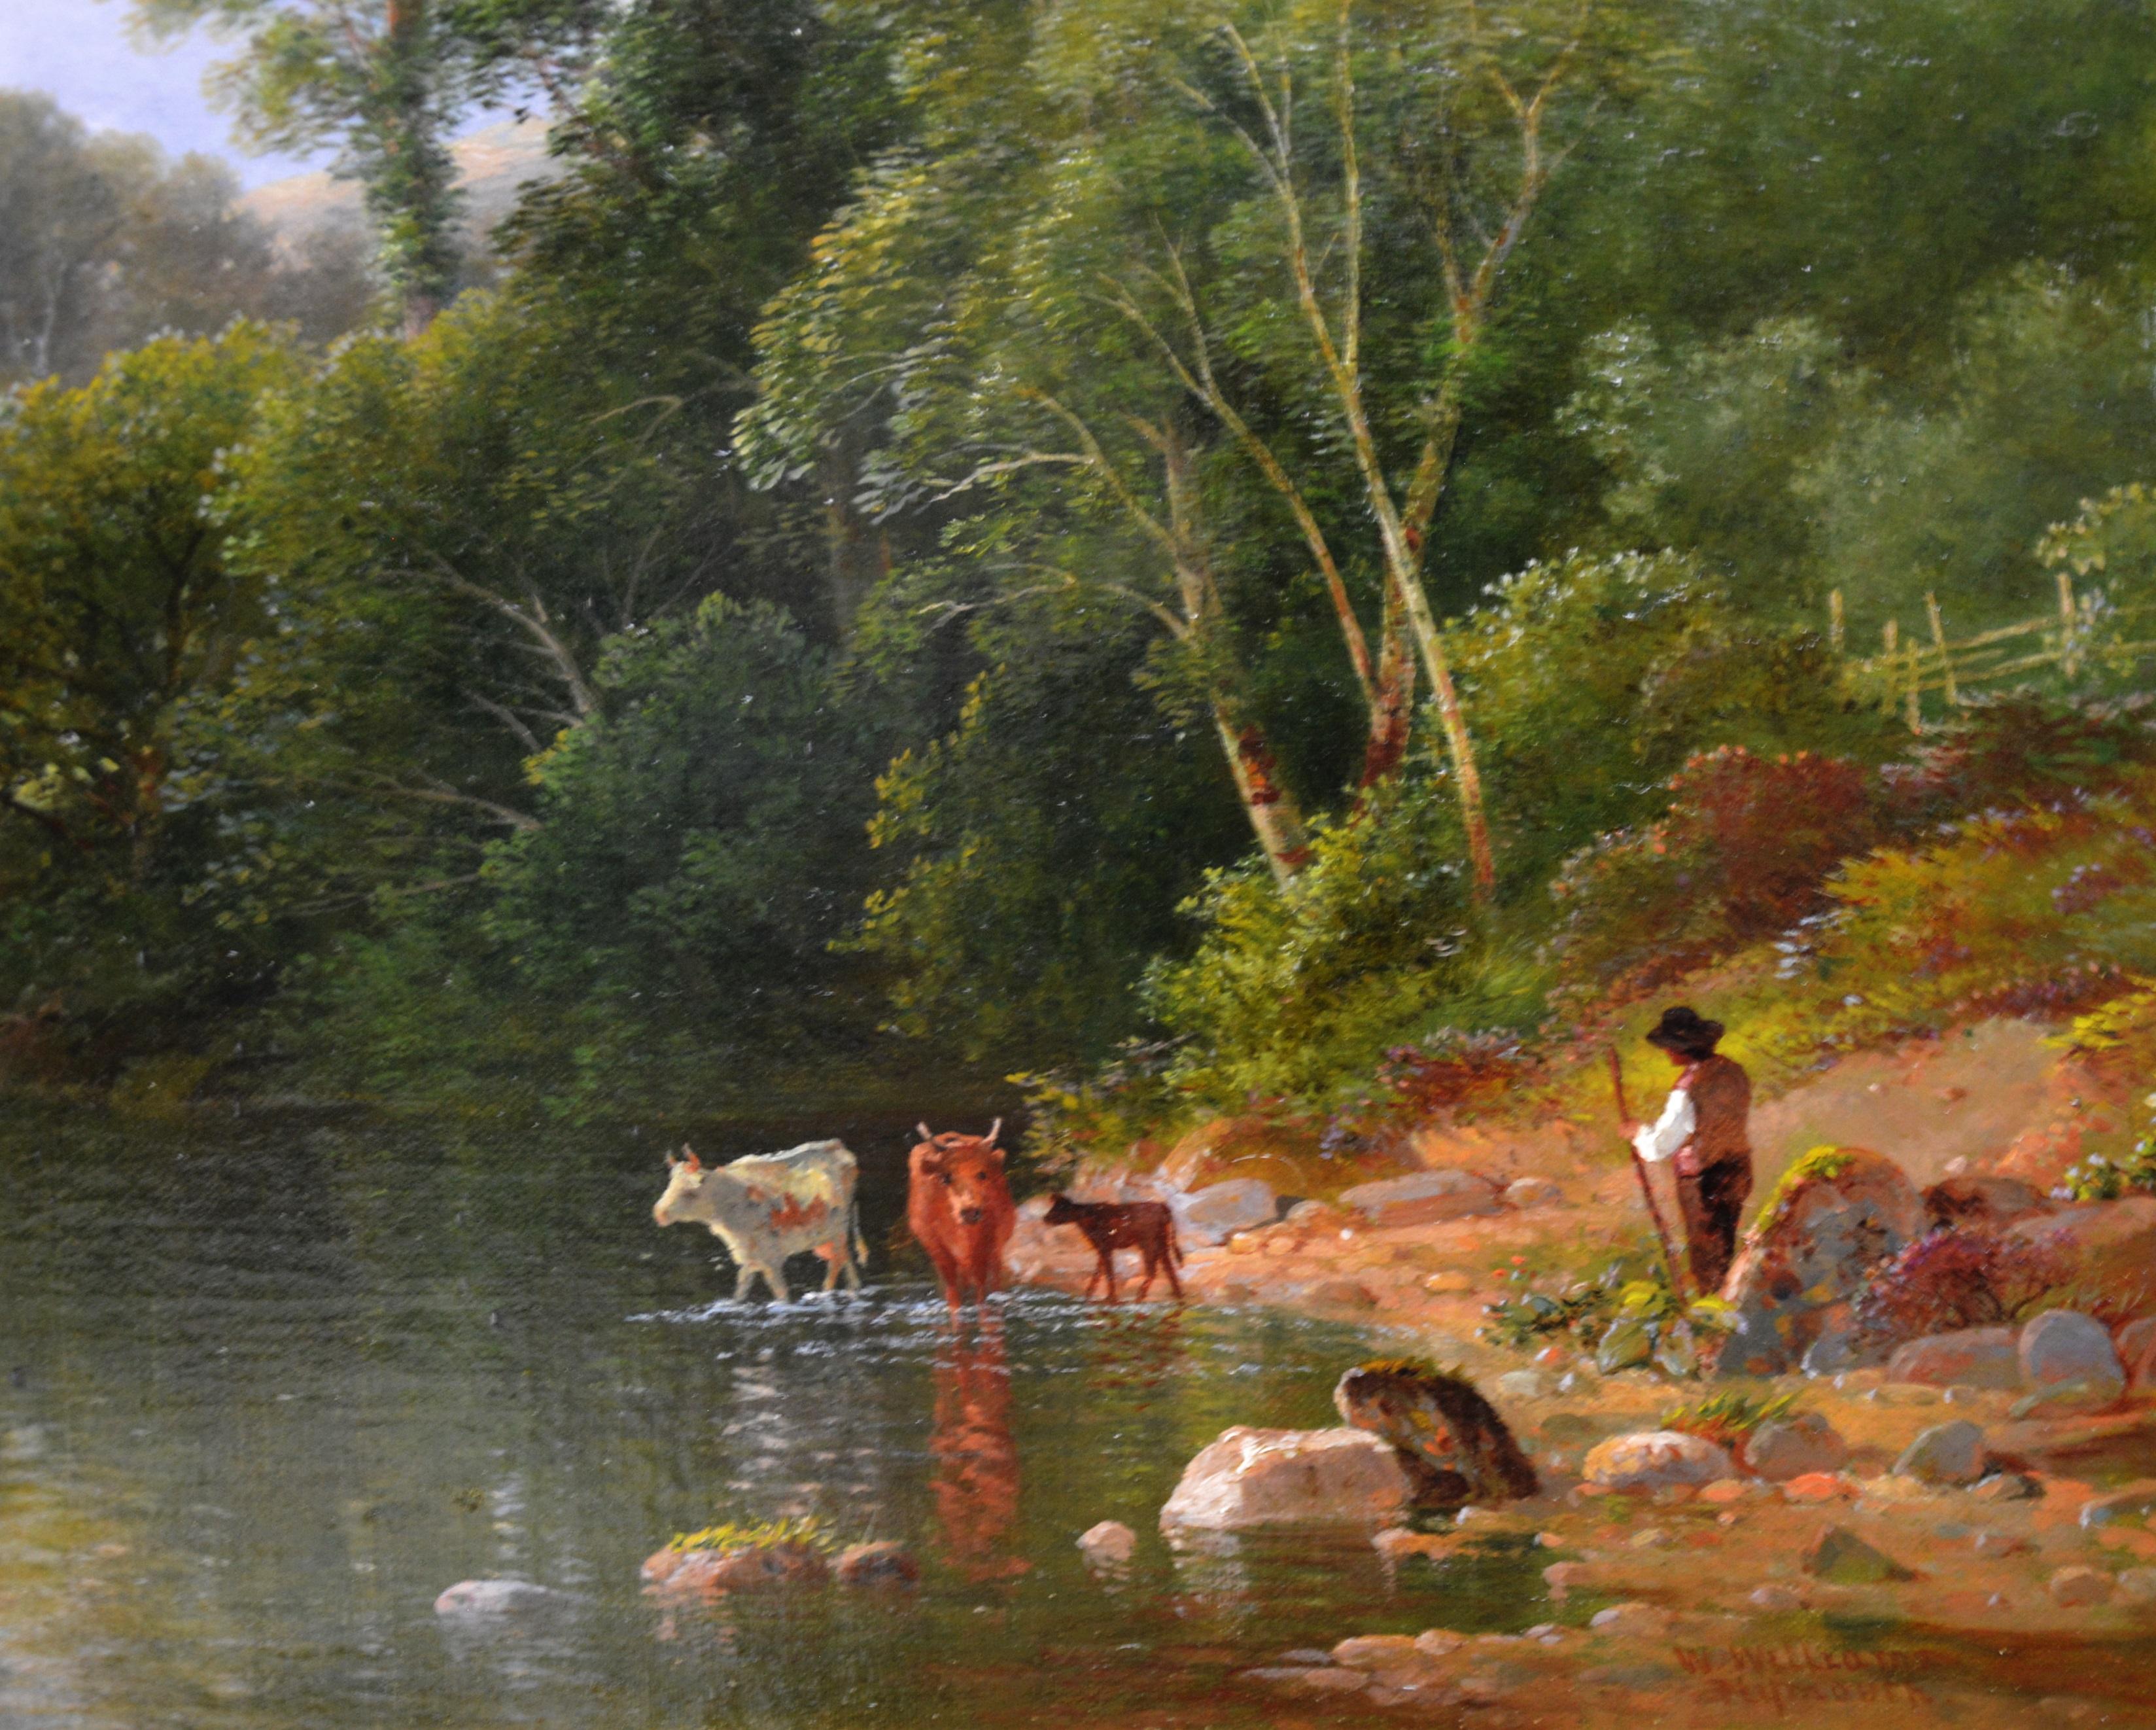 On the Teign, Devon - 19th Century English River Landscape Oil Painting - Brown Animal Painting by William Williams of Plymouth